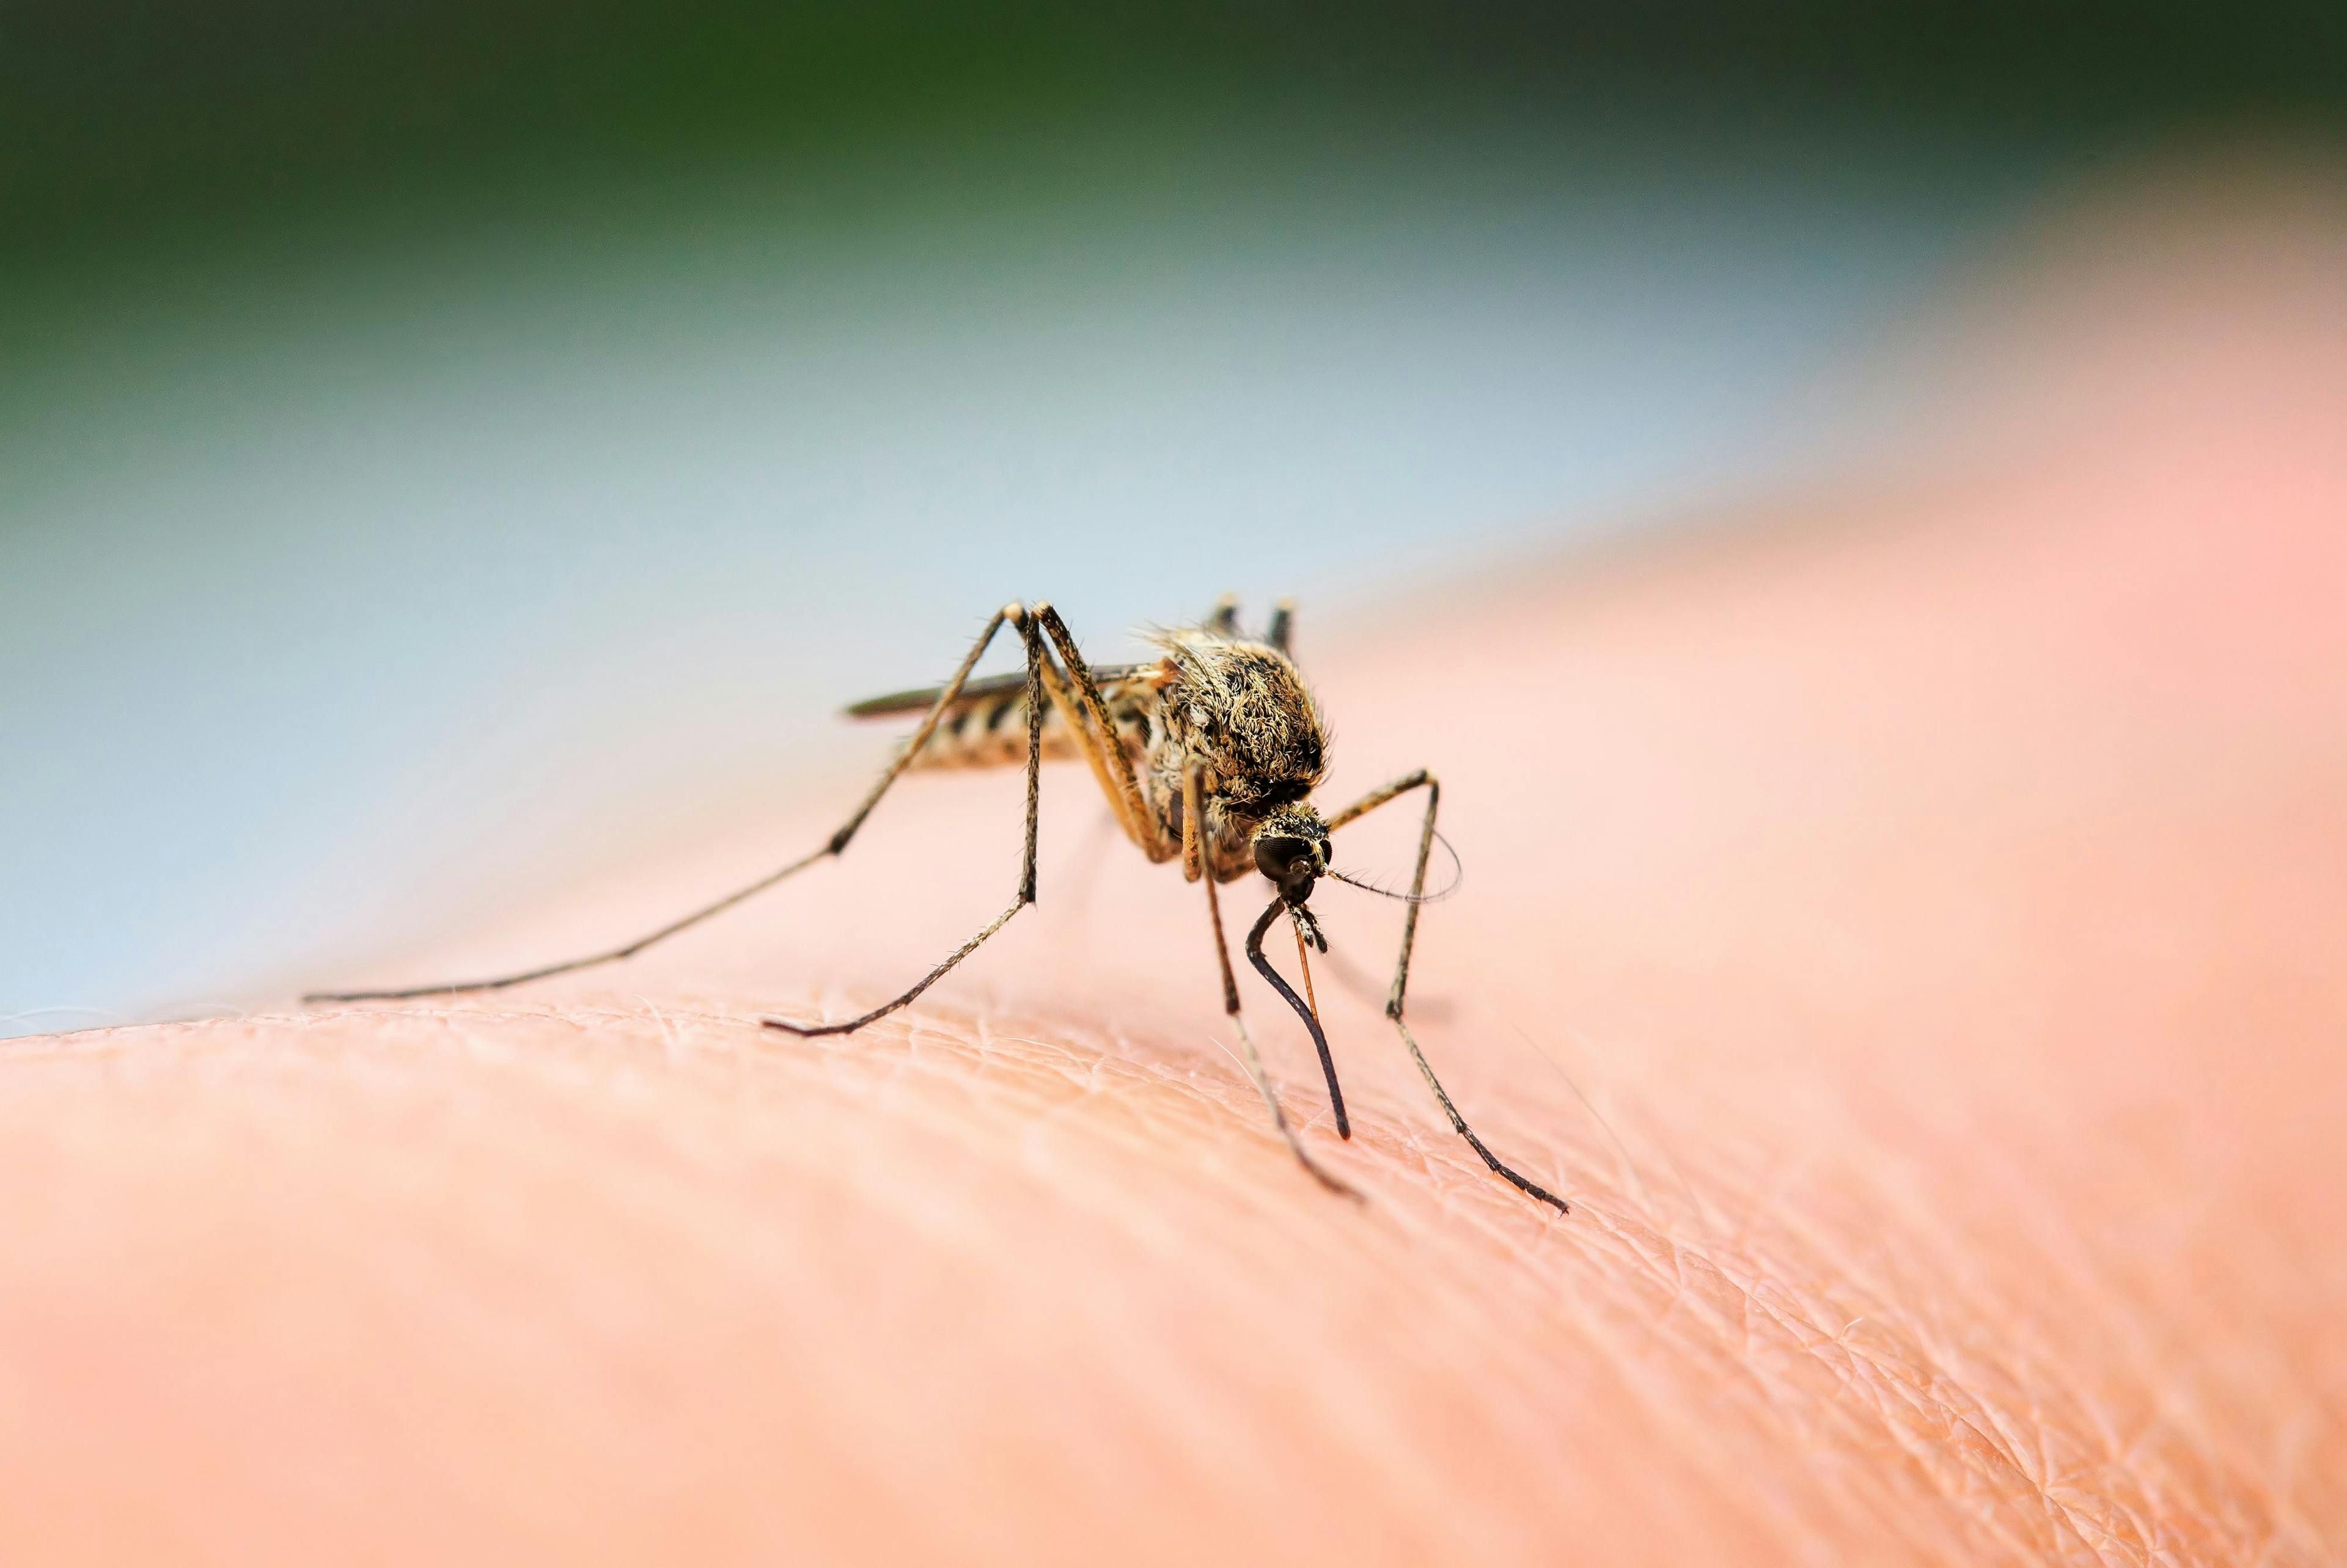 nasty insect mosquito sitting on her hand and drinks the blood of the pierced skin | Image Credit: © nataba - stock.adobe.com